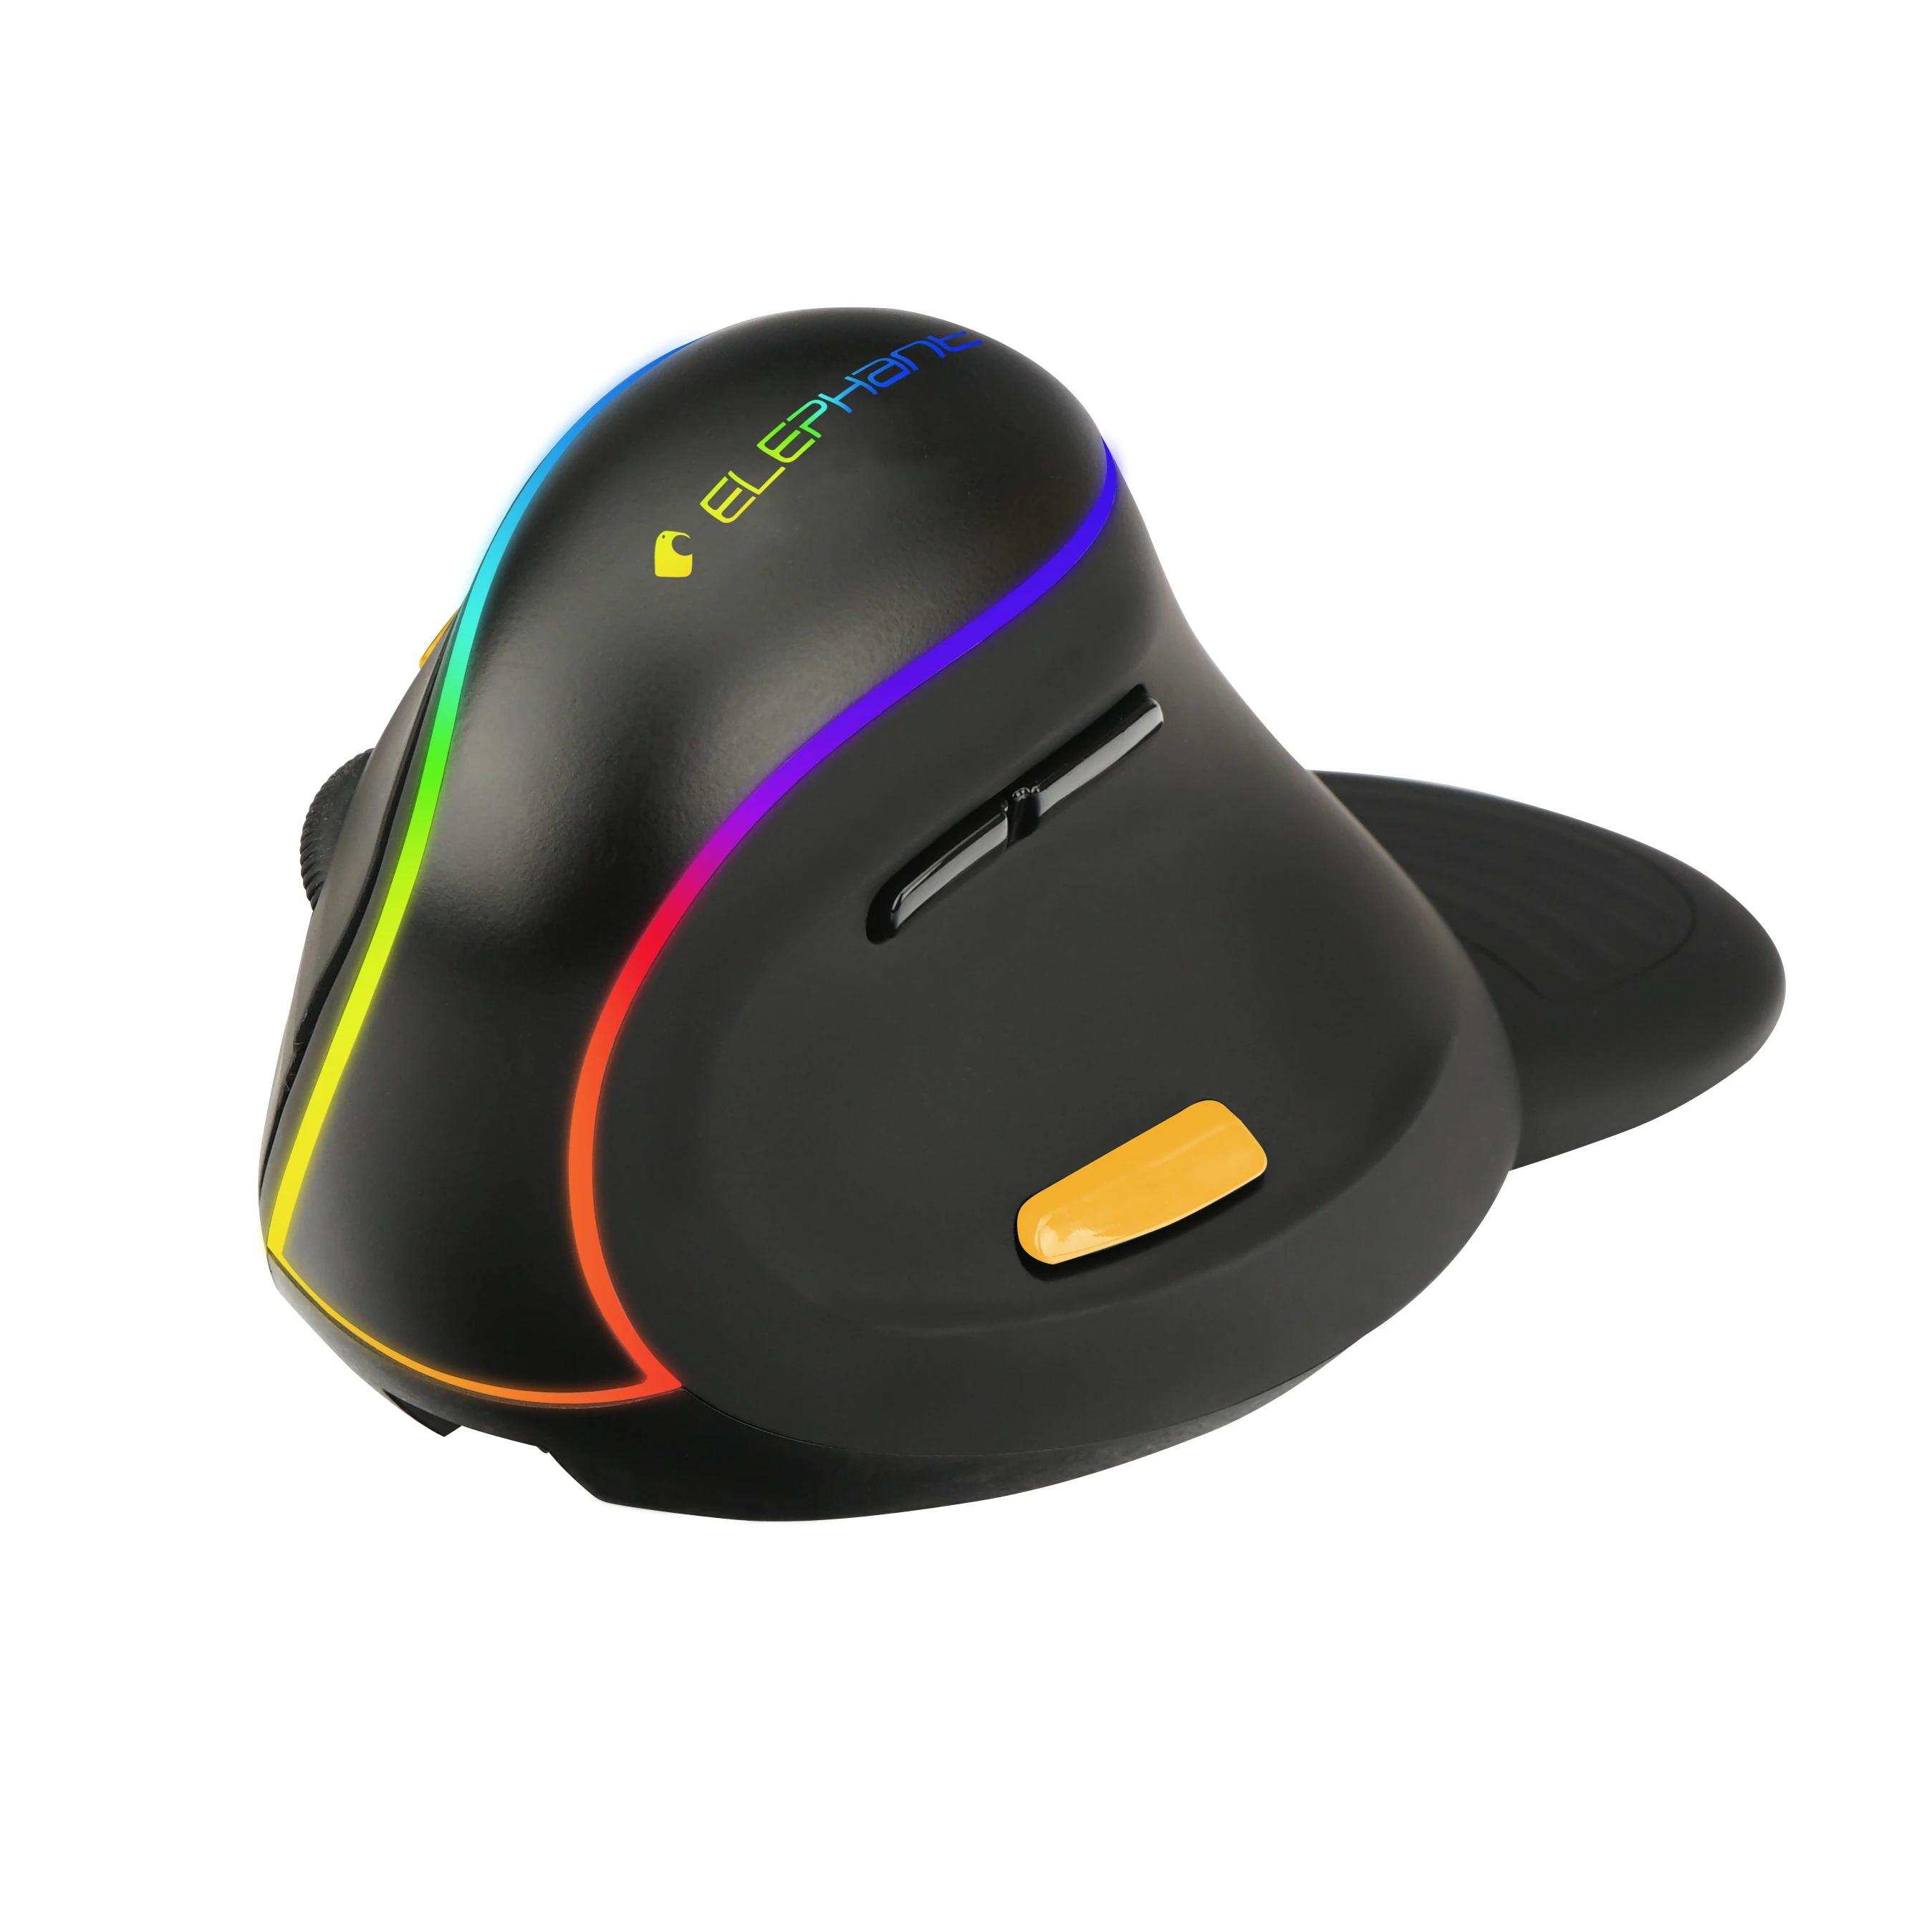 

Dragon War new design 2.4Ghz Wireless rechargeable RGB Vertical Ergonomic Gaming Mouse